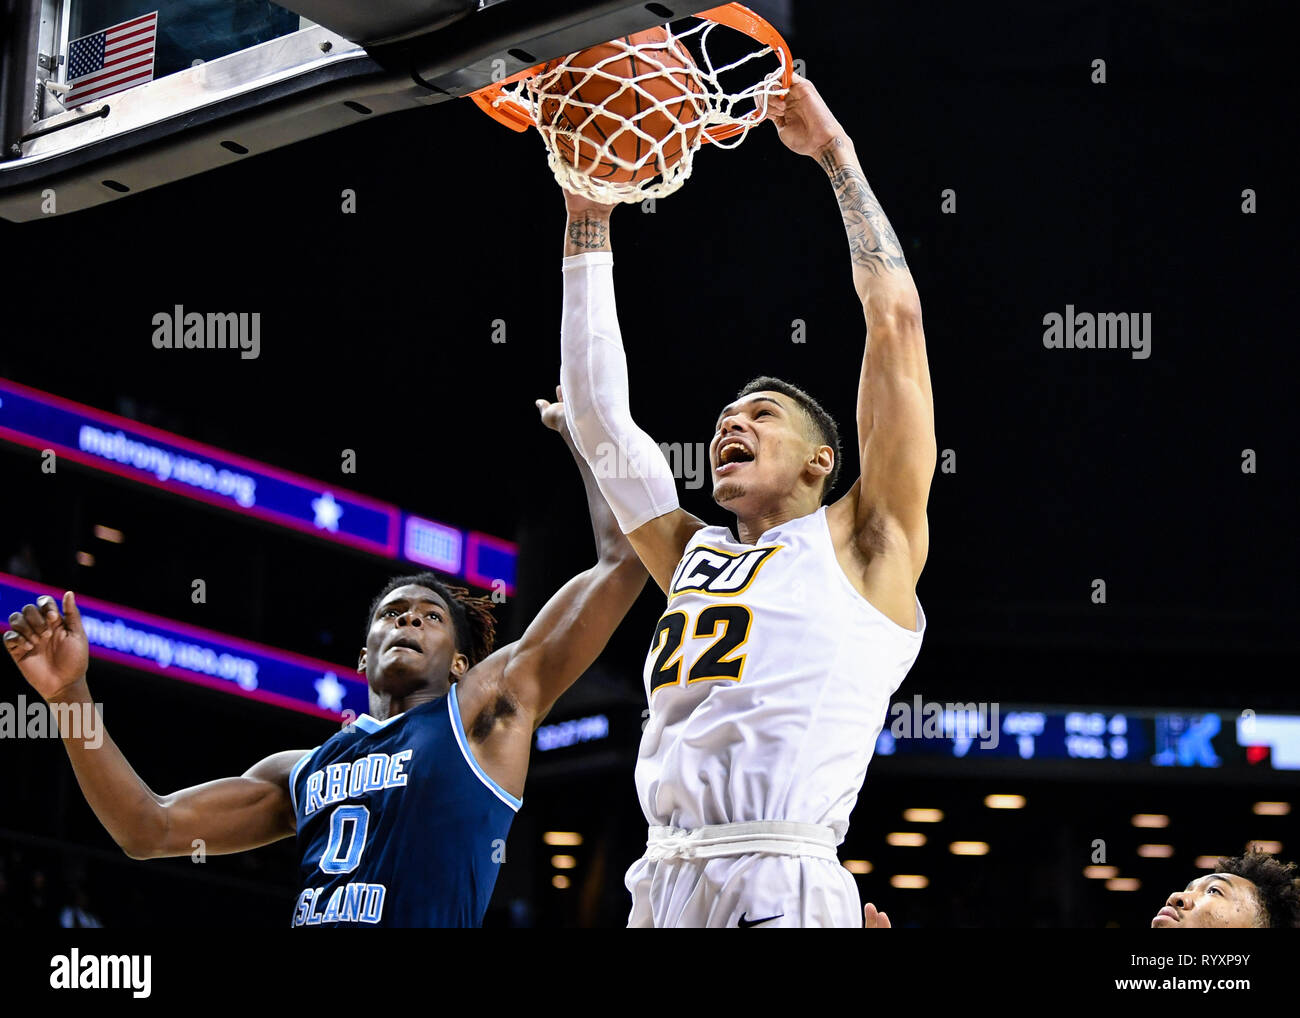 Brooklyn, New York, USA. 15th Mar, 2019. Virginia Commonwealth Rams forward MICHAEL GILMORE (22) goes to the basket for a slam dunk over Rhode Island Rams forward JERMAINE HARRIS (0) during the first half at Barclays Center Credit: Terrence Williams/ZUMA Wire/Alamy Live News Stock Photo